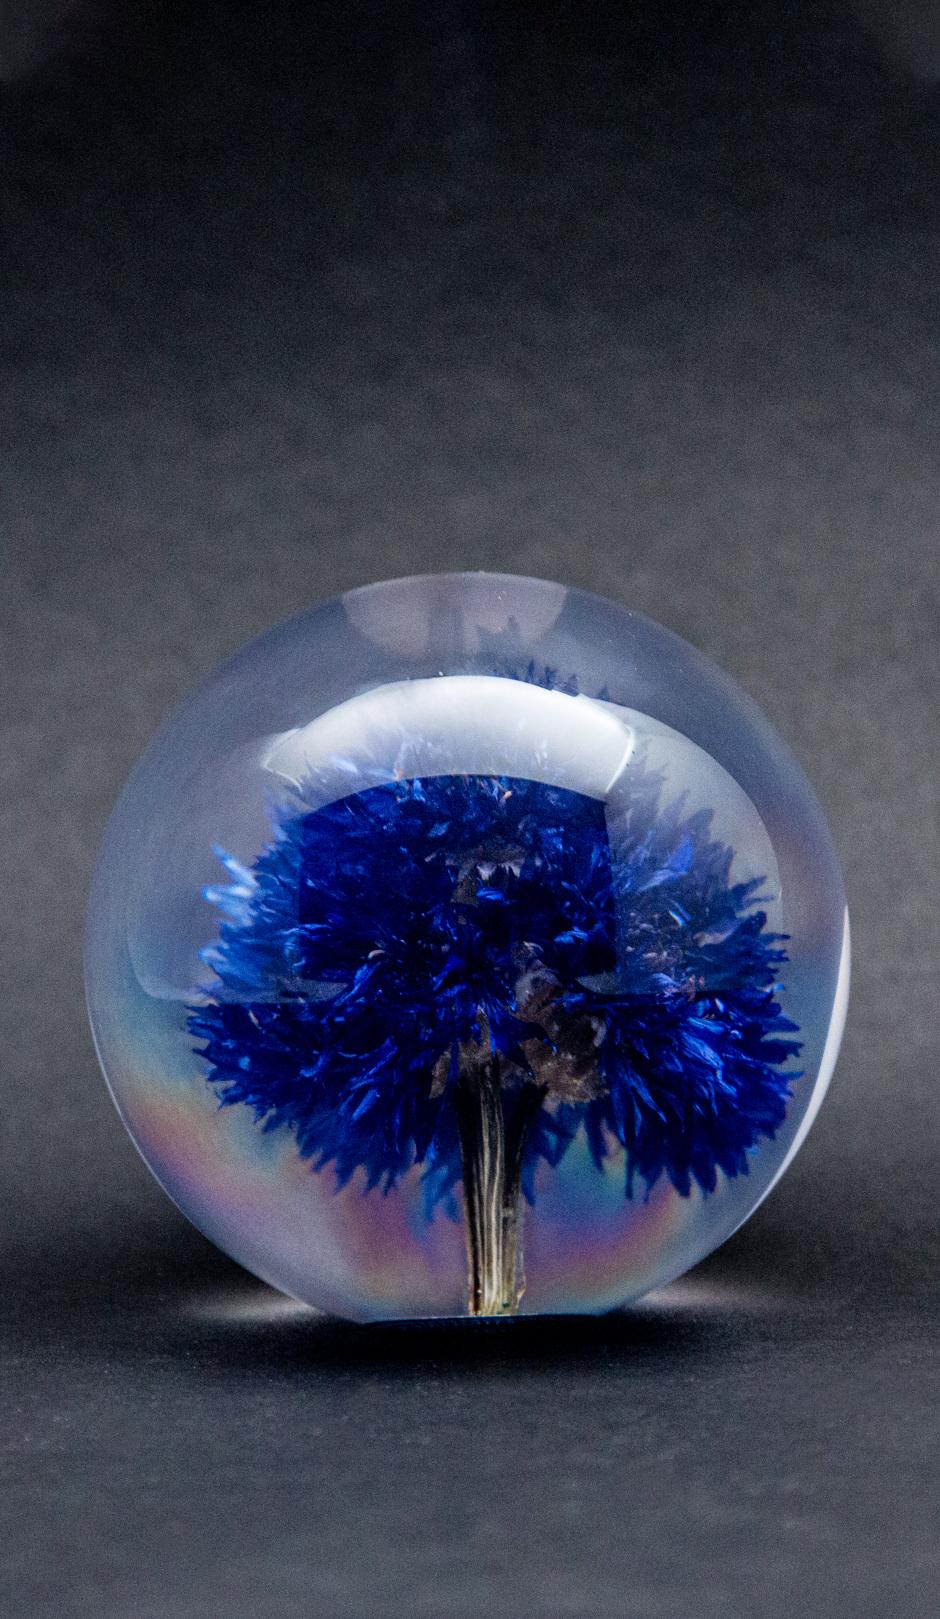 Cornflower paperweight. Created from an encased, natural blue cornflower. Measure: 3